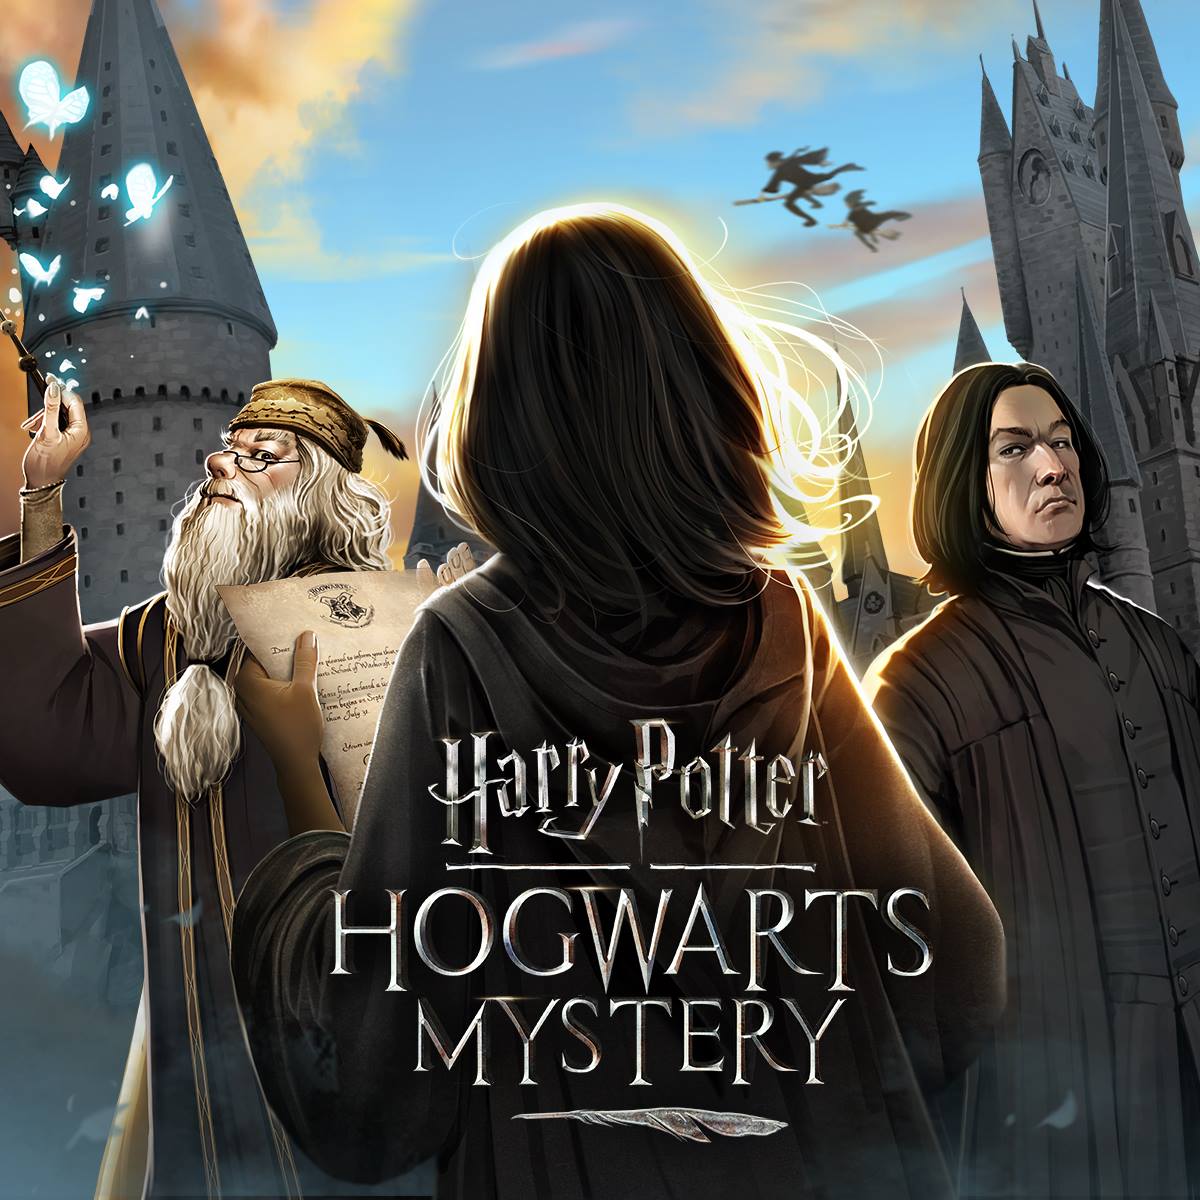 Watch The New Trailer For Harry Potter Hogwarts Mystery